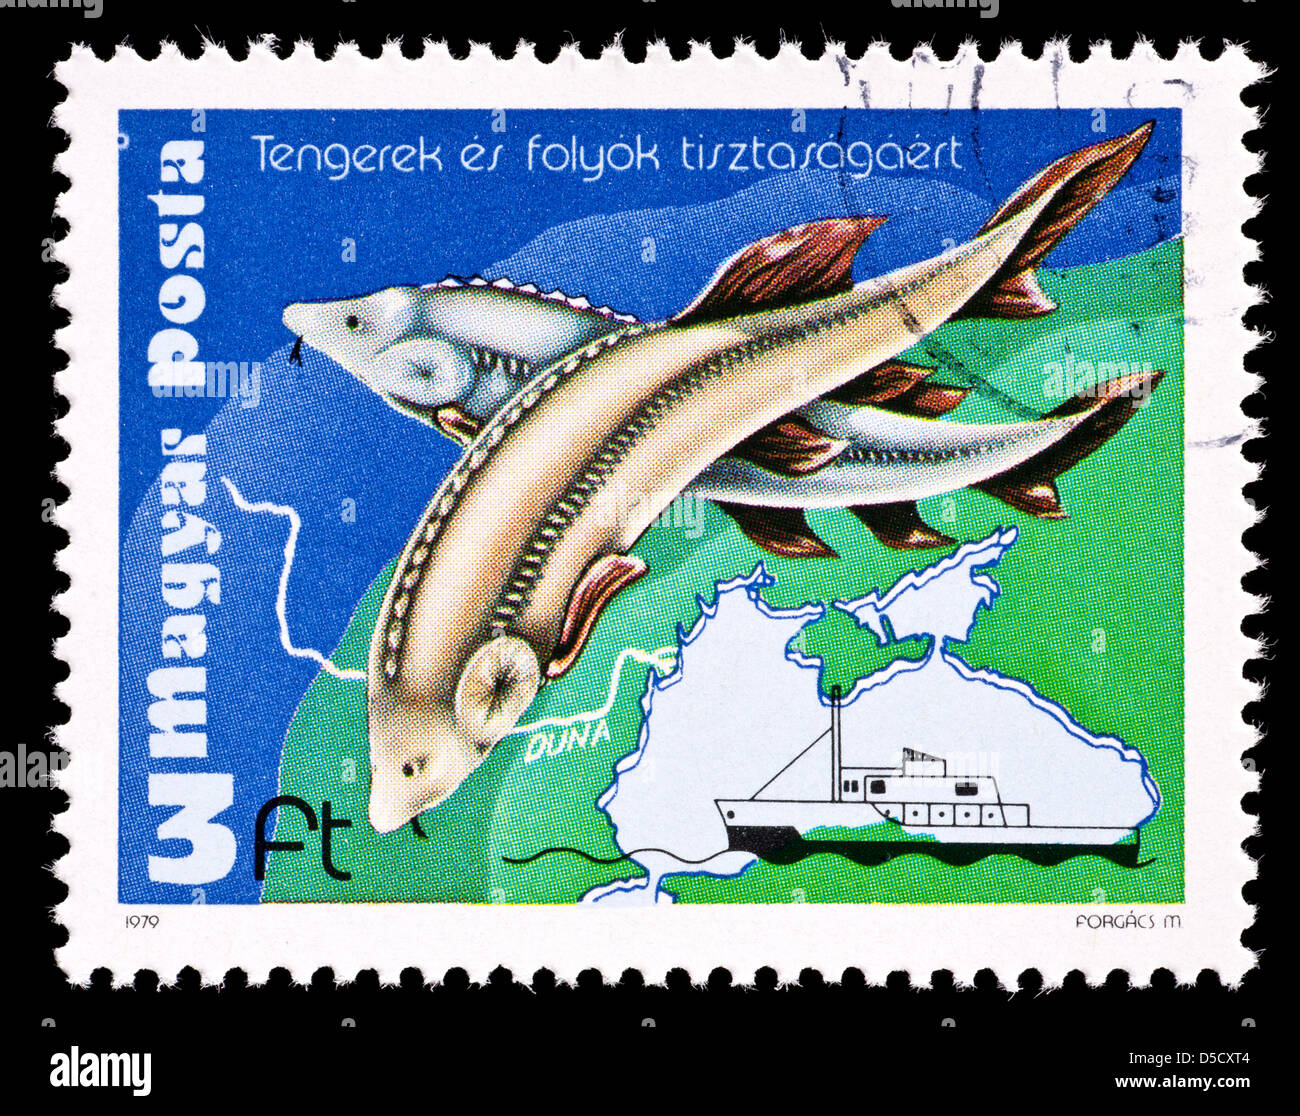 Postage stamp from Hungary depicting sturgeons, a map of the Danube river and the ship Calypso, for environmental protections. Stock Photo